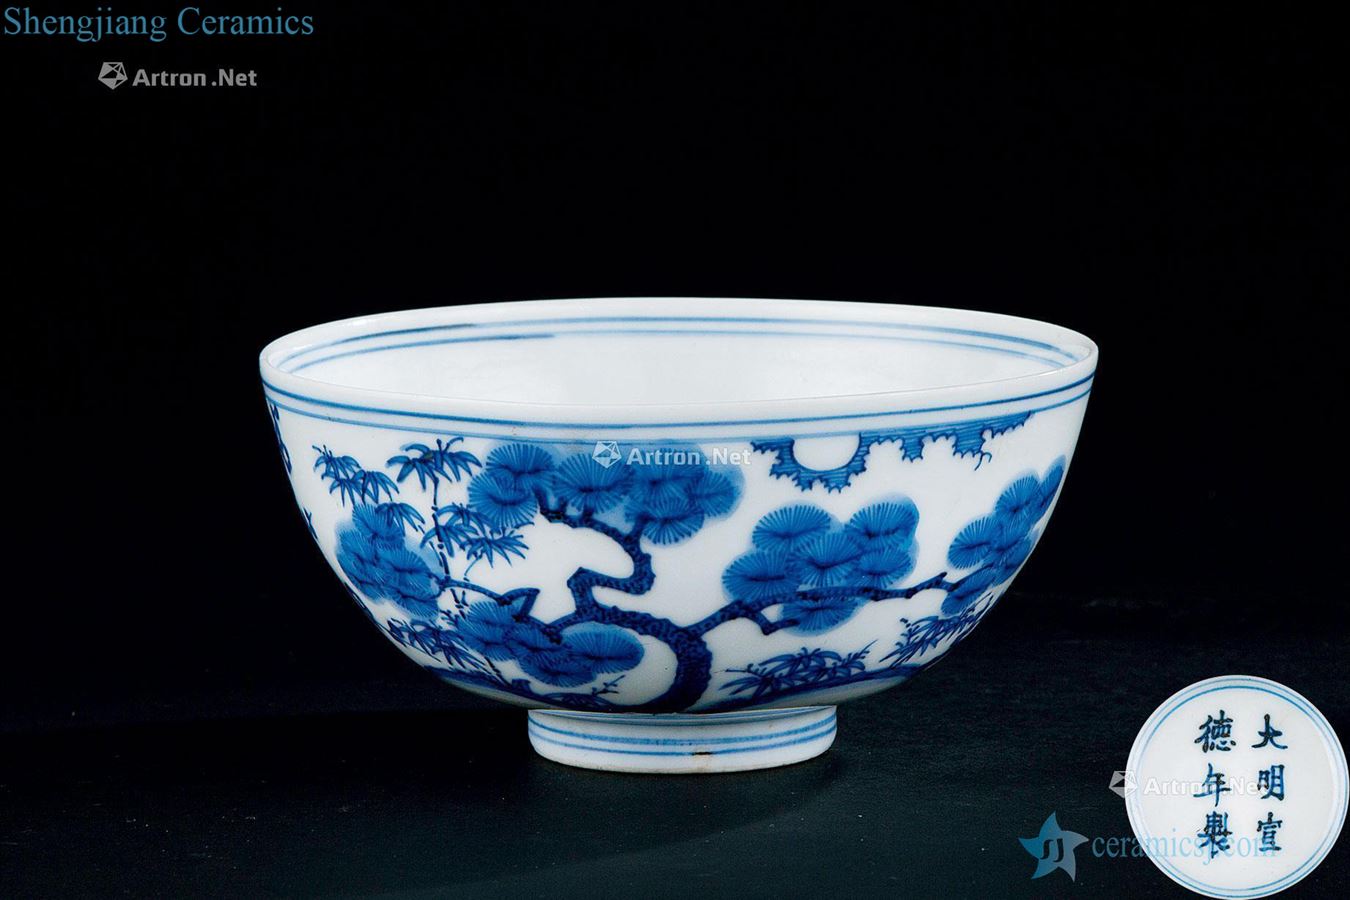 In the Ming dynasty (1368-1644) poetic lines bowl at the age of blue and white